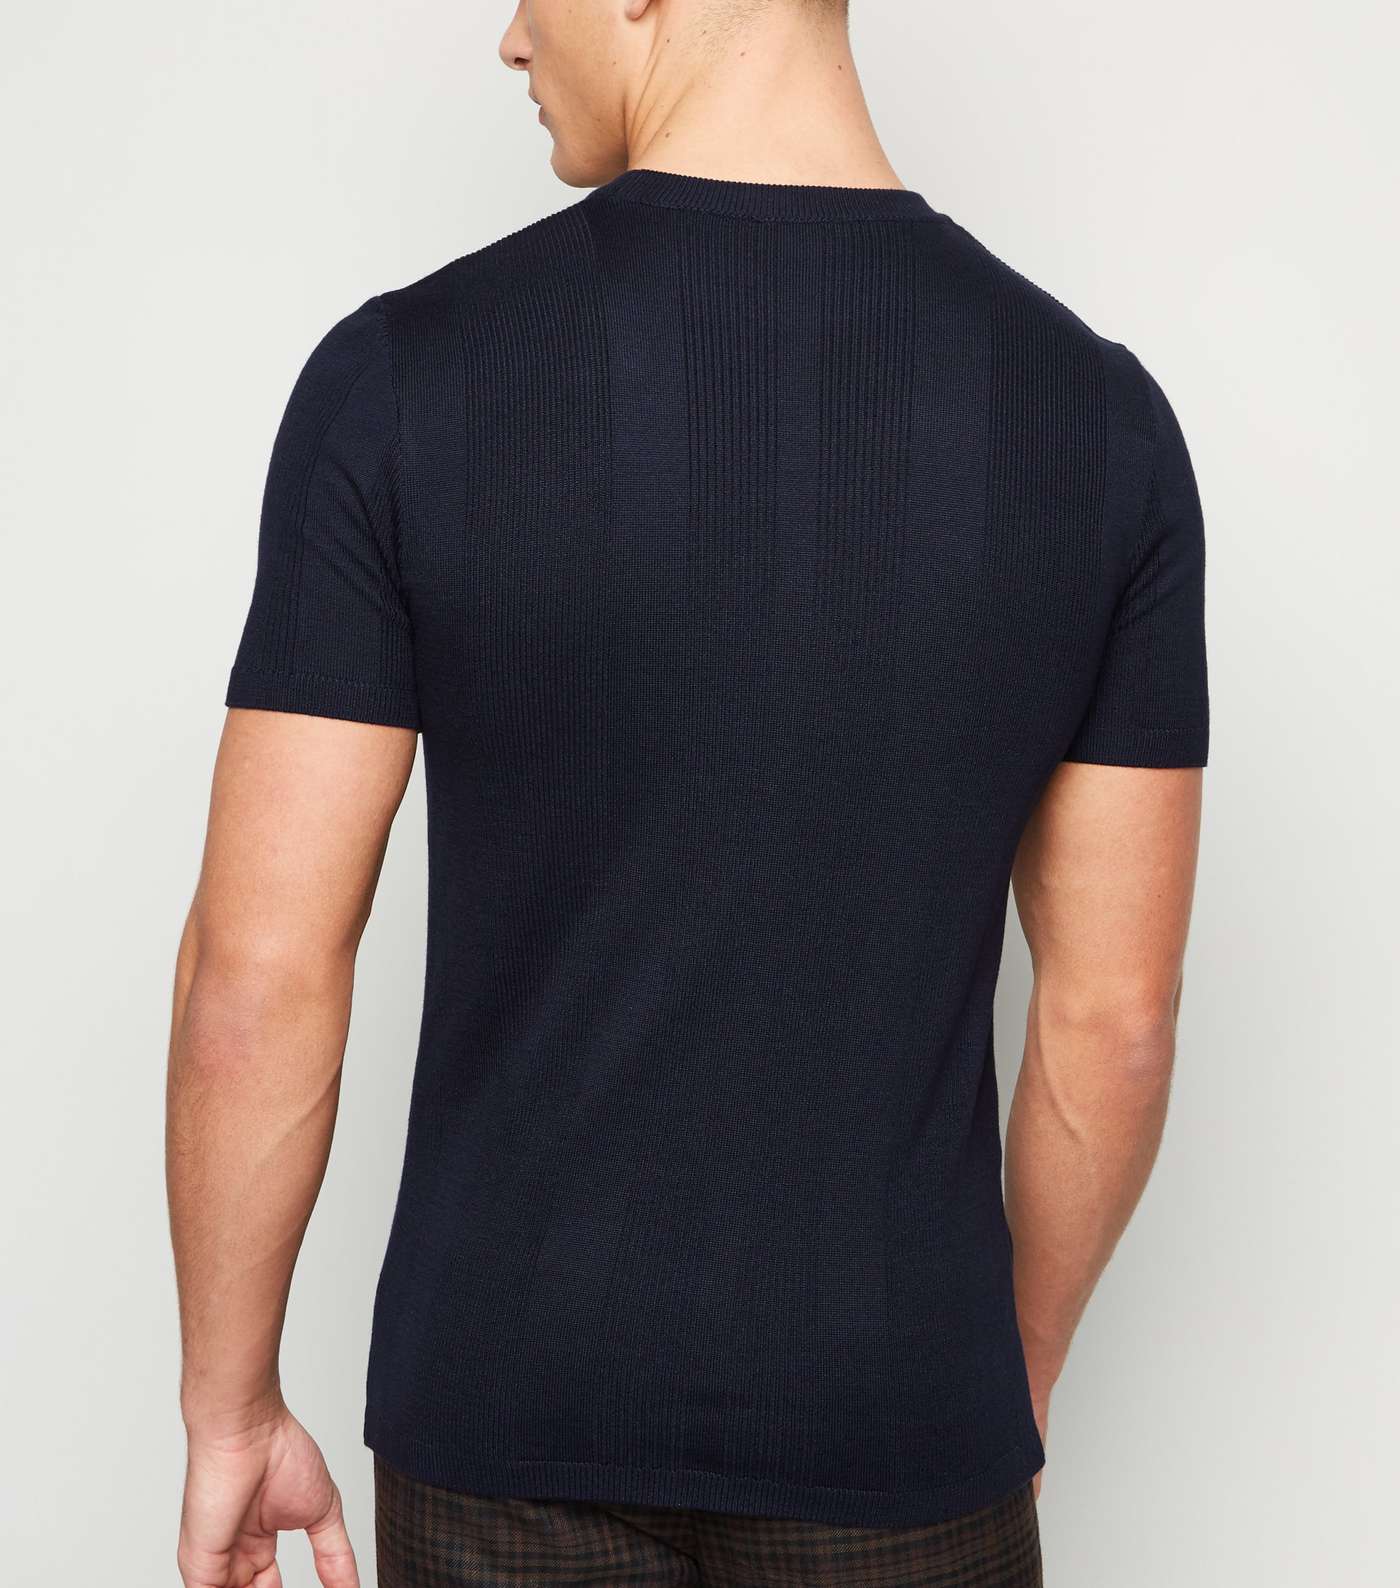 Navy Ribbed Knit Muscle Fit T-Shirt Image 3